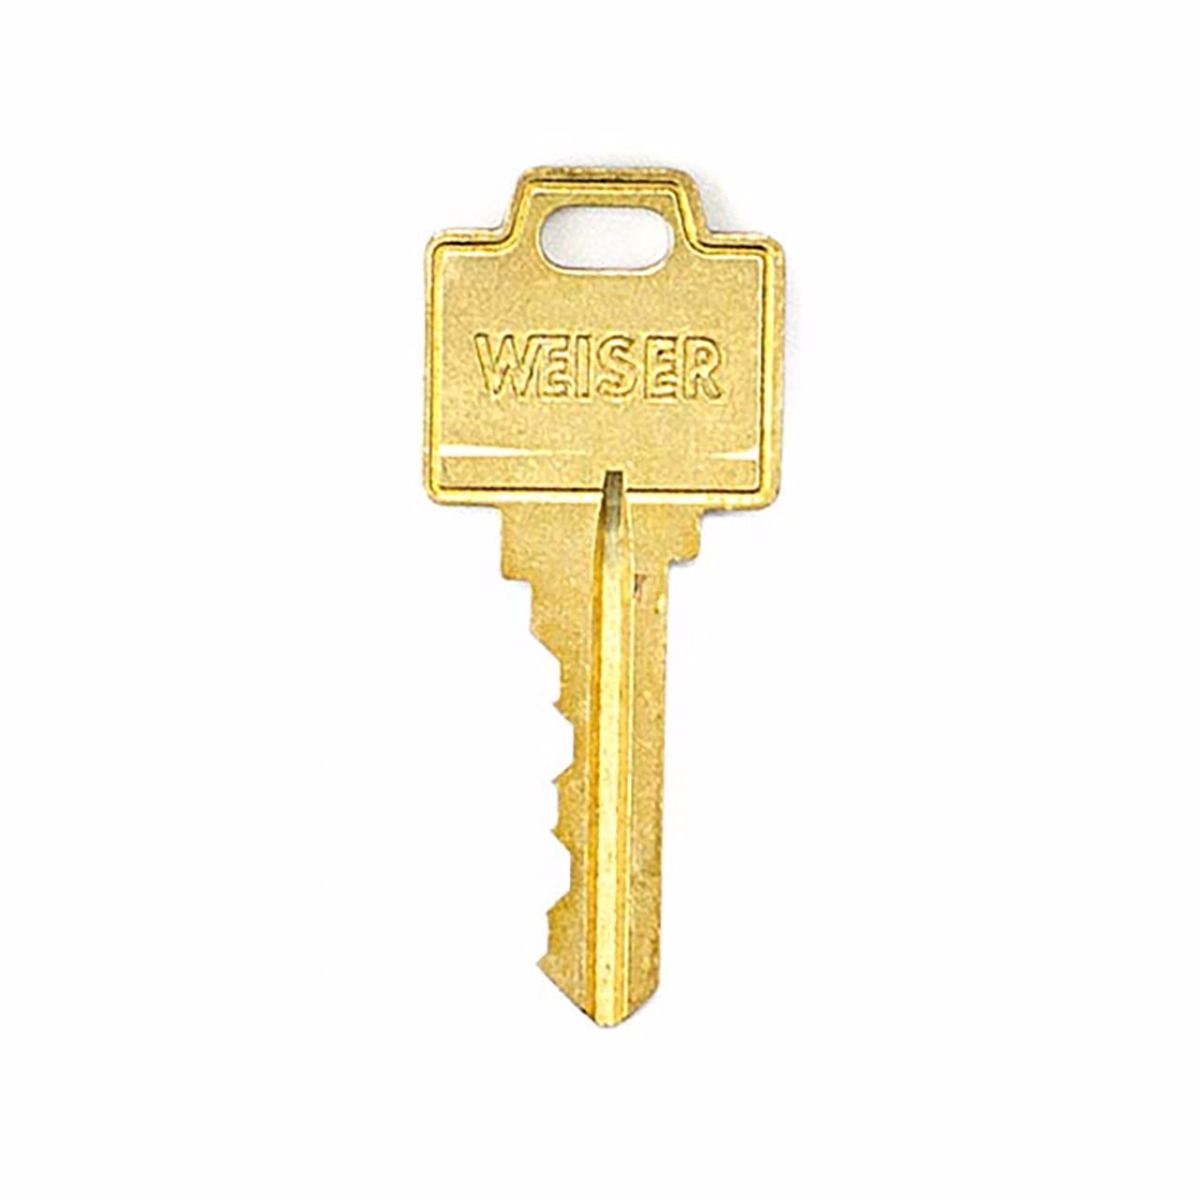 Extra Key for Weiser Knobsets